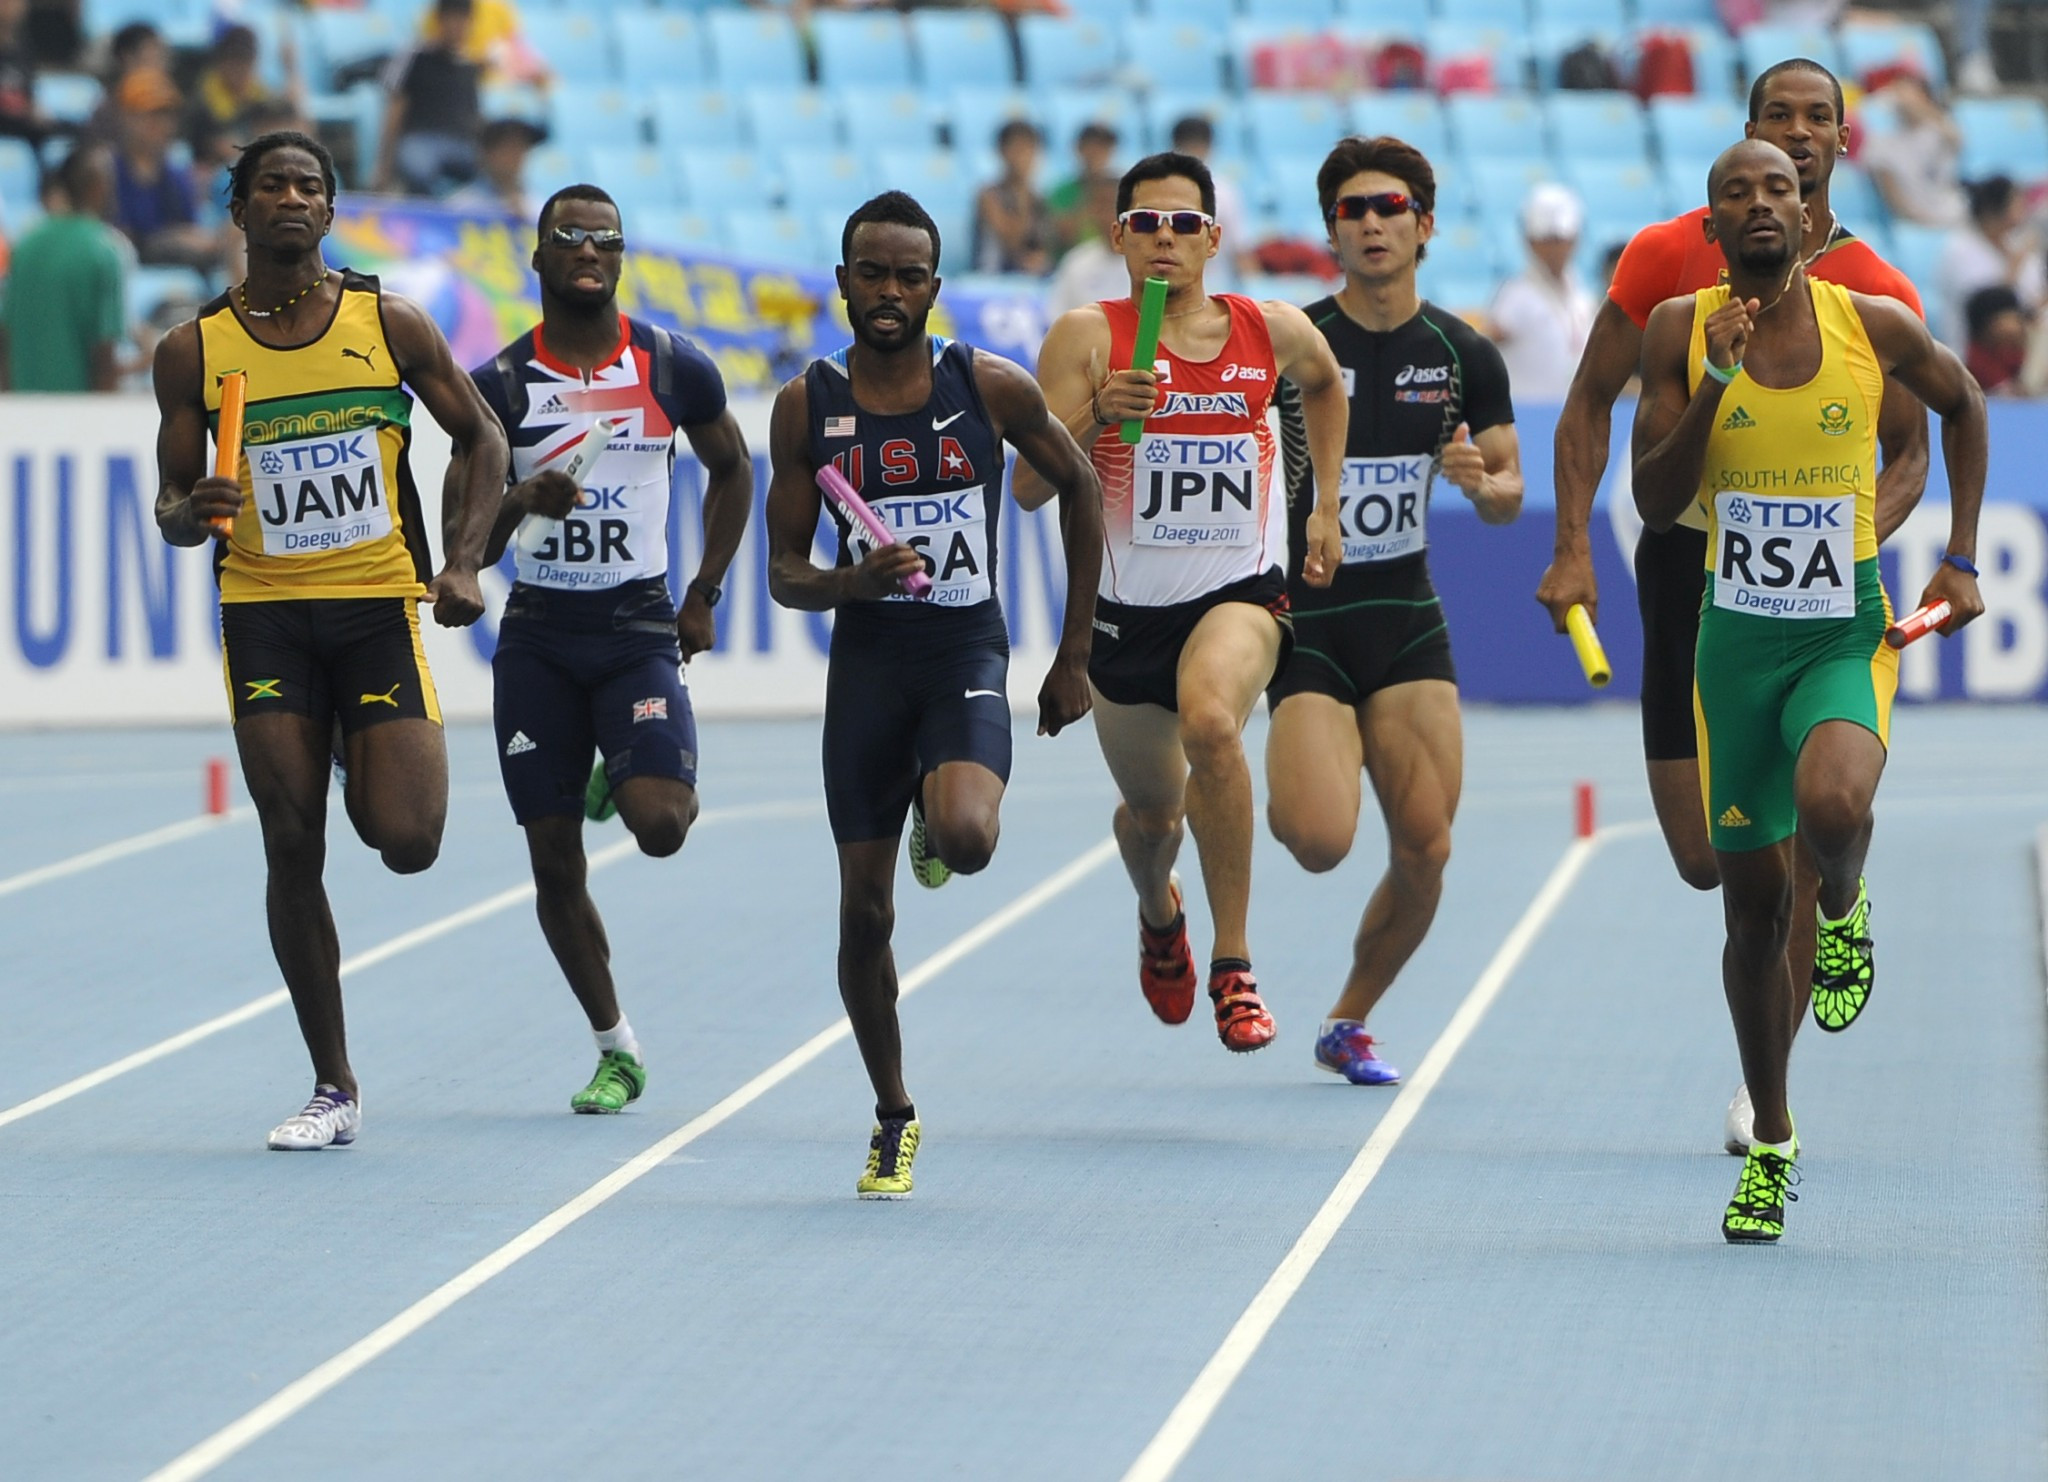 Riker Hylton, left, pictured running in the 4x400m relay at the 2011 World Championships in Daegu ©Getty Images